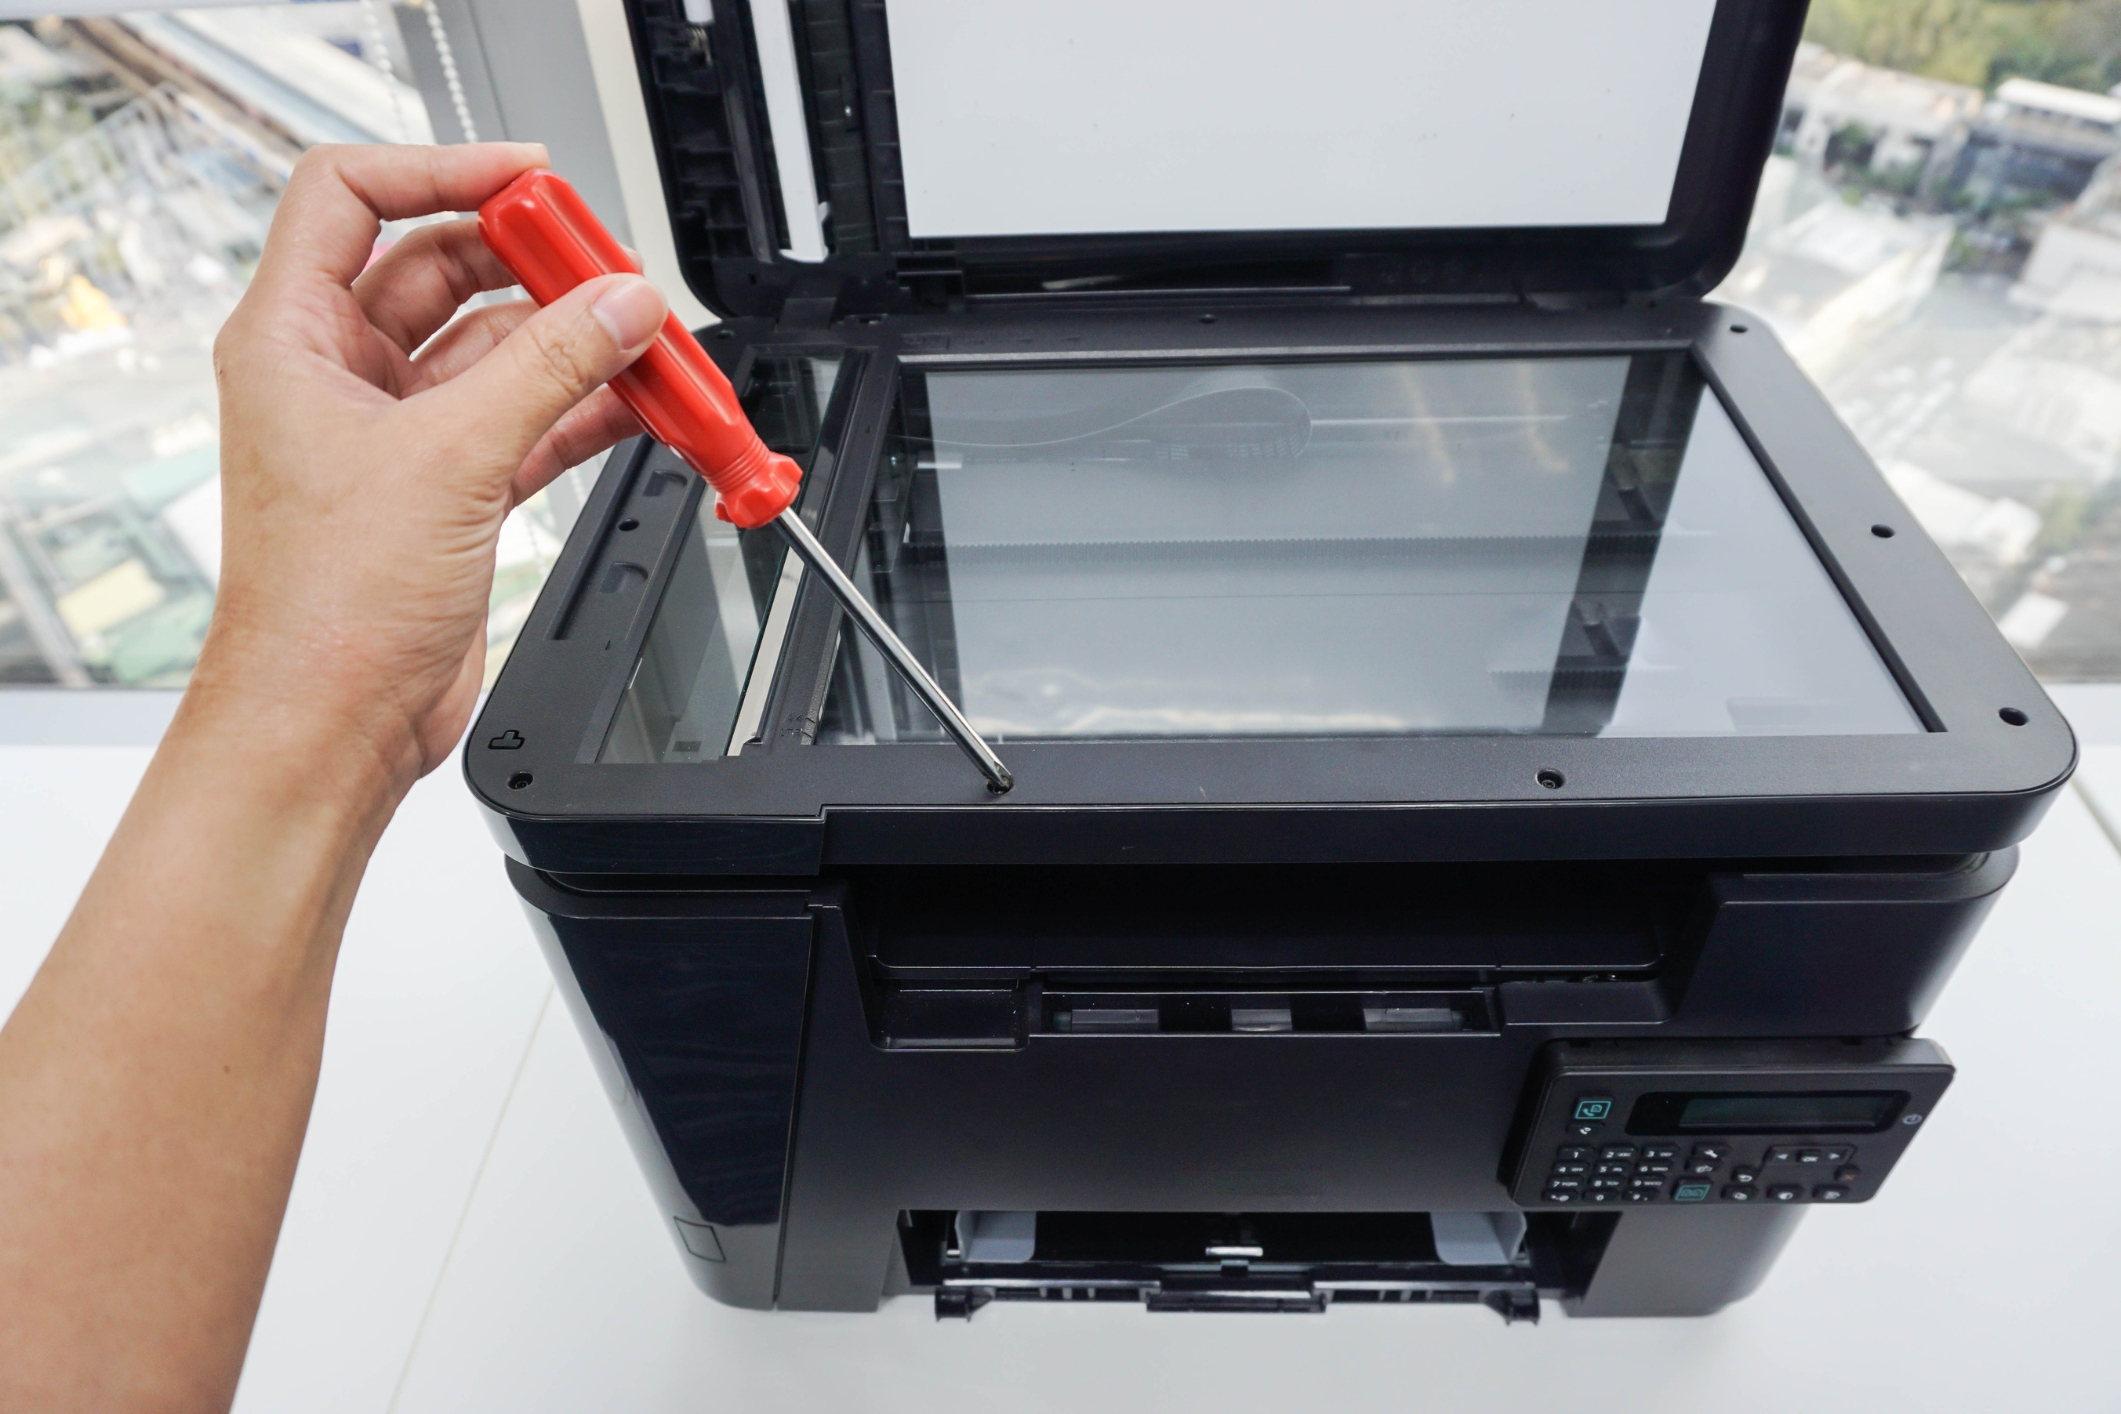 A close up of an office printer where a technician uses a screwdriver on the machine signifying printer service.